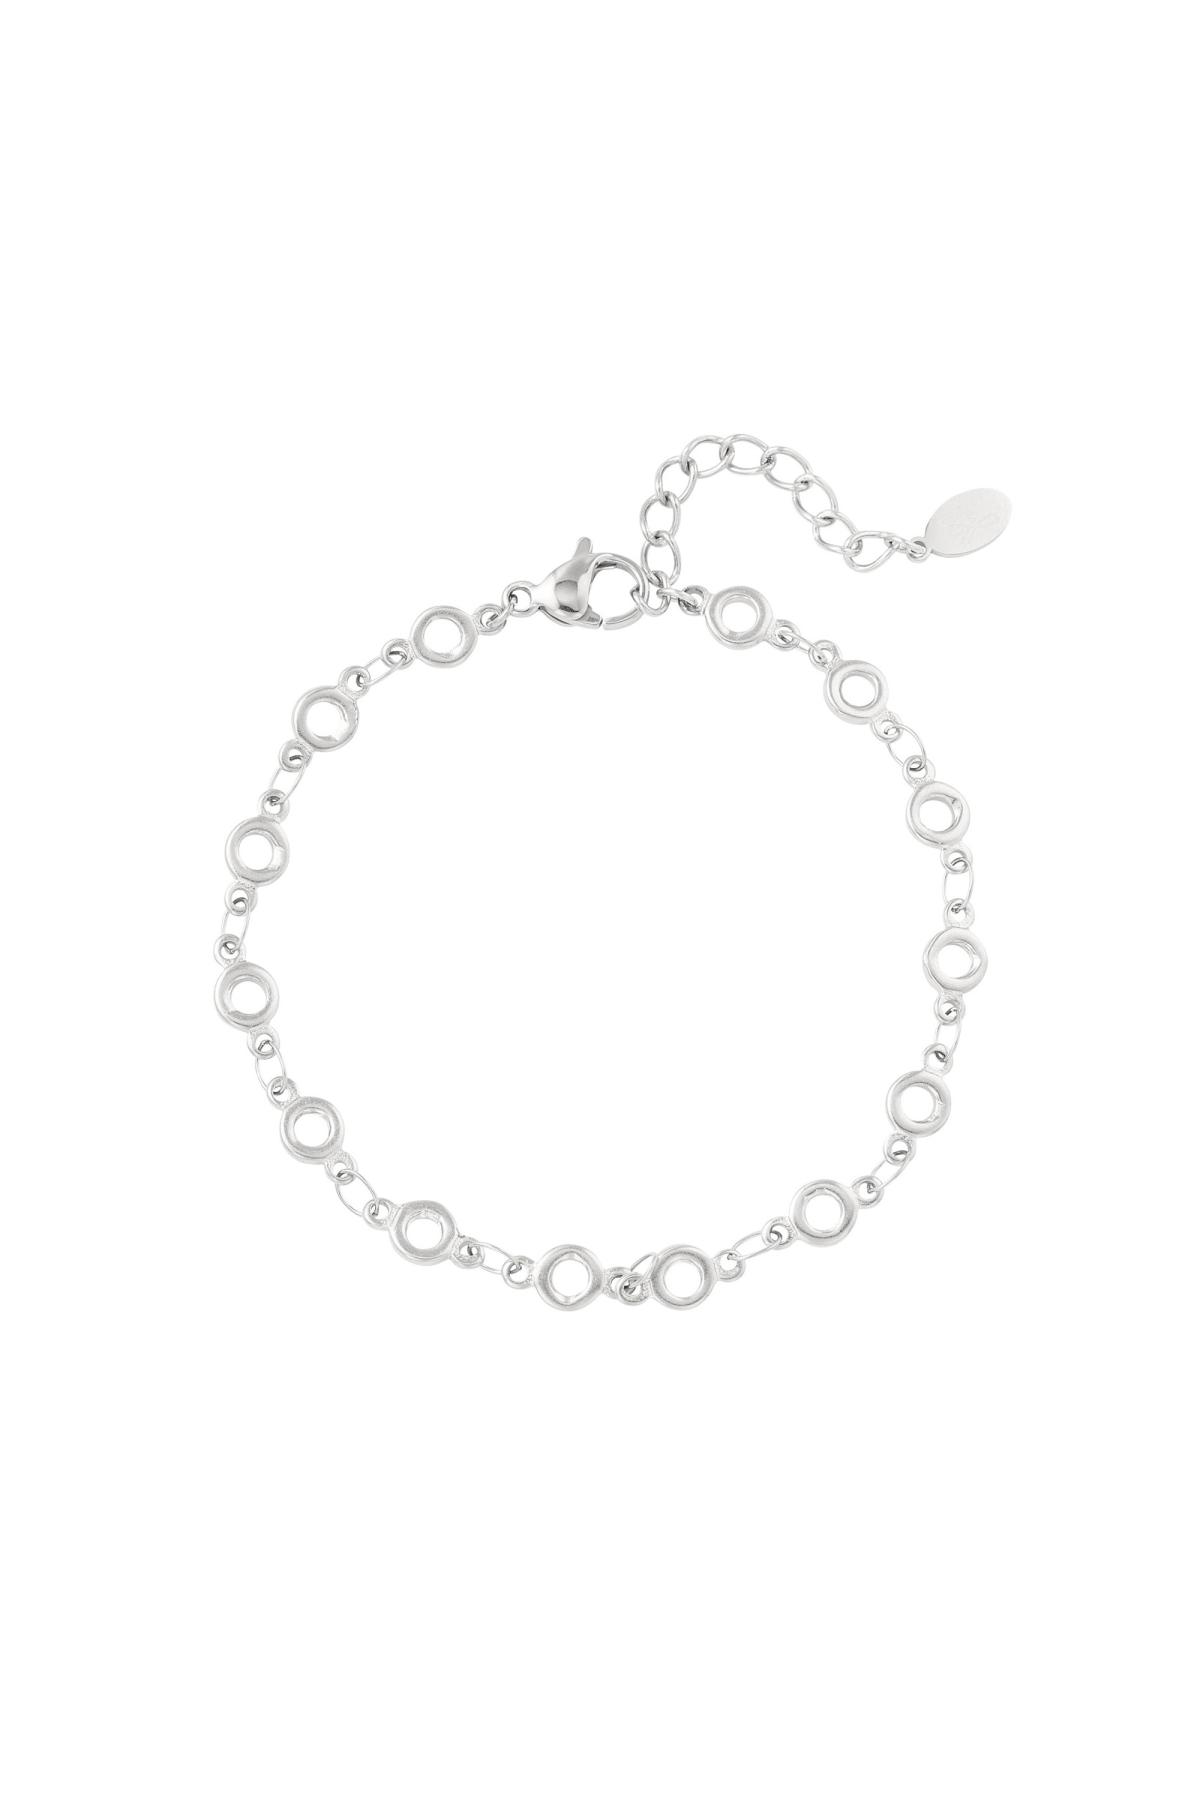 Bracciale a maglie cerchi Silver Stainless Steel h5 